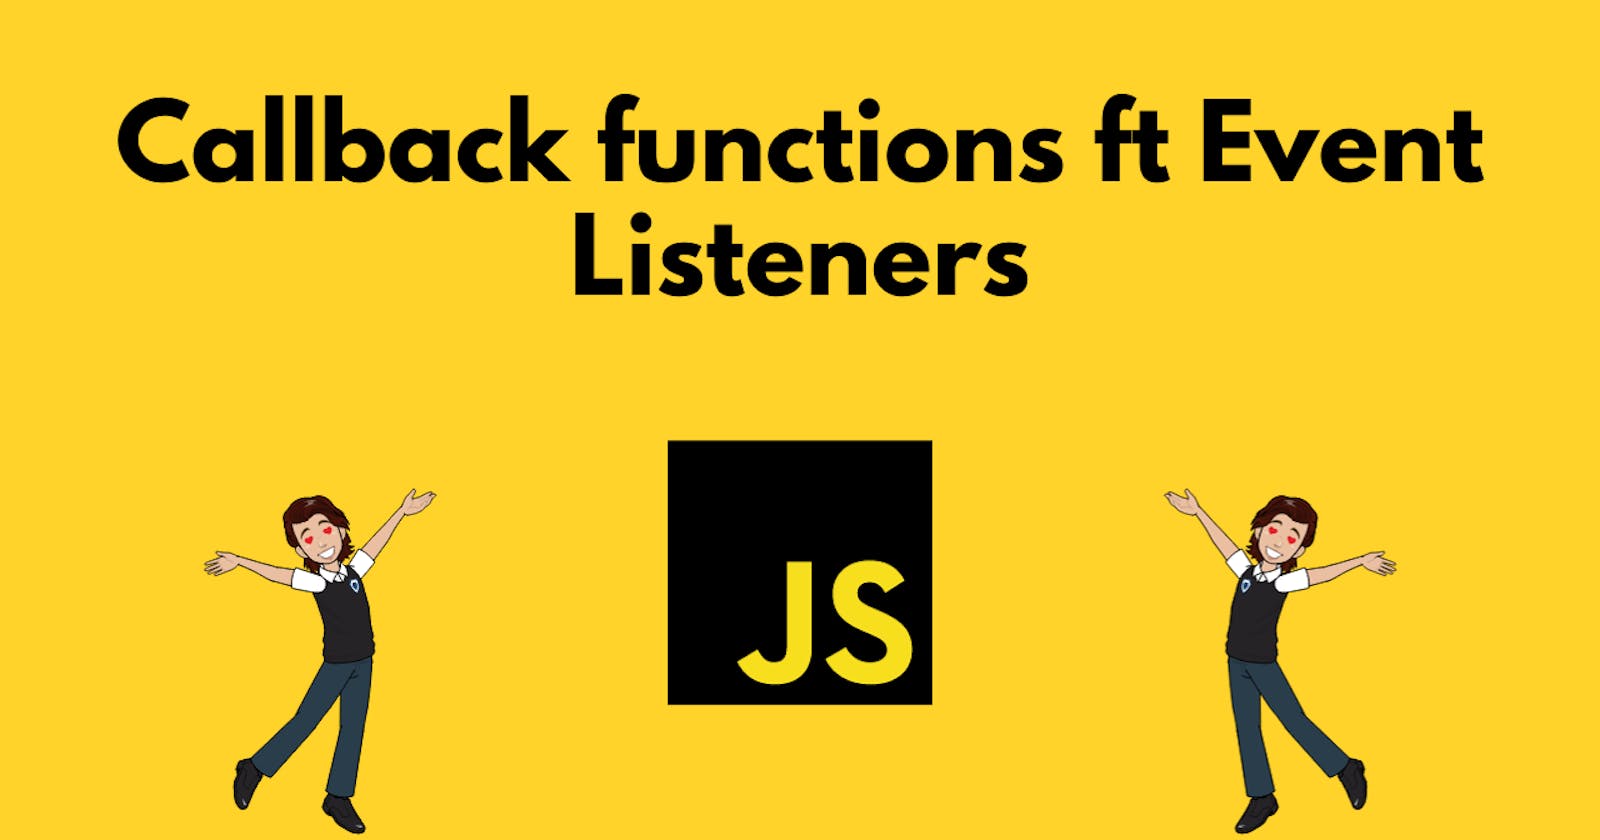 Best Explanation for Callback Functions 📲 ft Event Listeners ( Bonus : Interview Question )